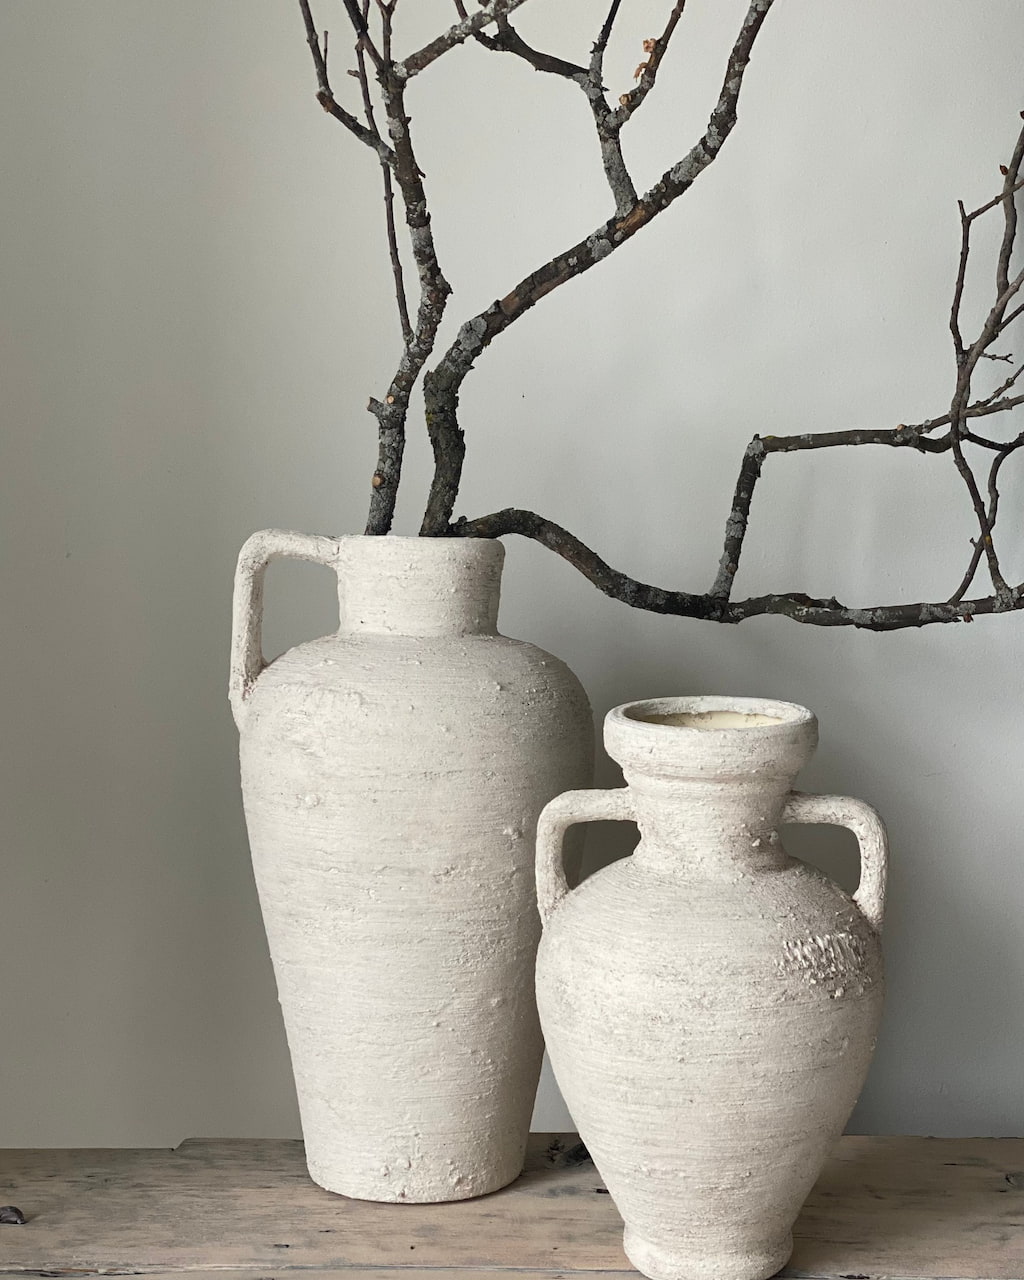 Hand Finished Rustic Vases of the Salvaged Vessel - aêtava